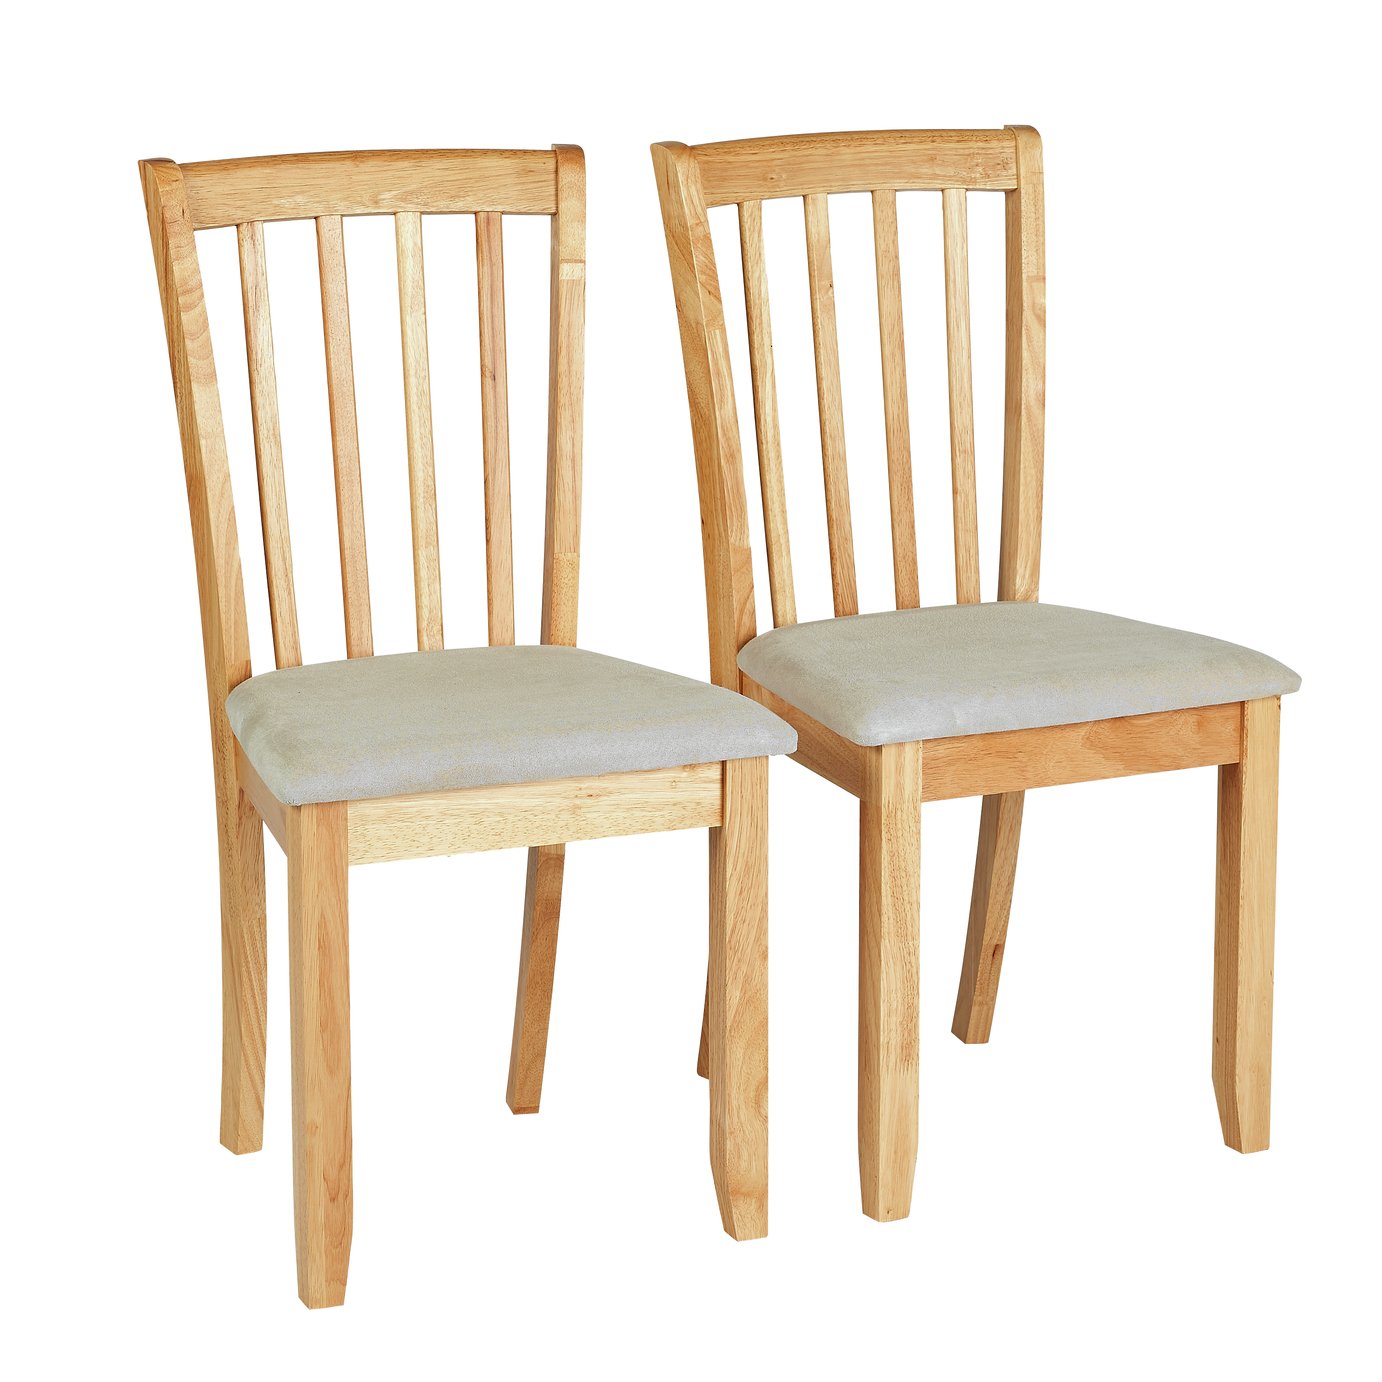 Dining chairs | Page 2 | Argos Price Tracker | pricehistory.co.uk